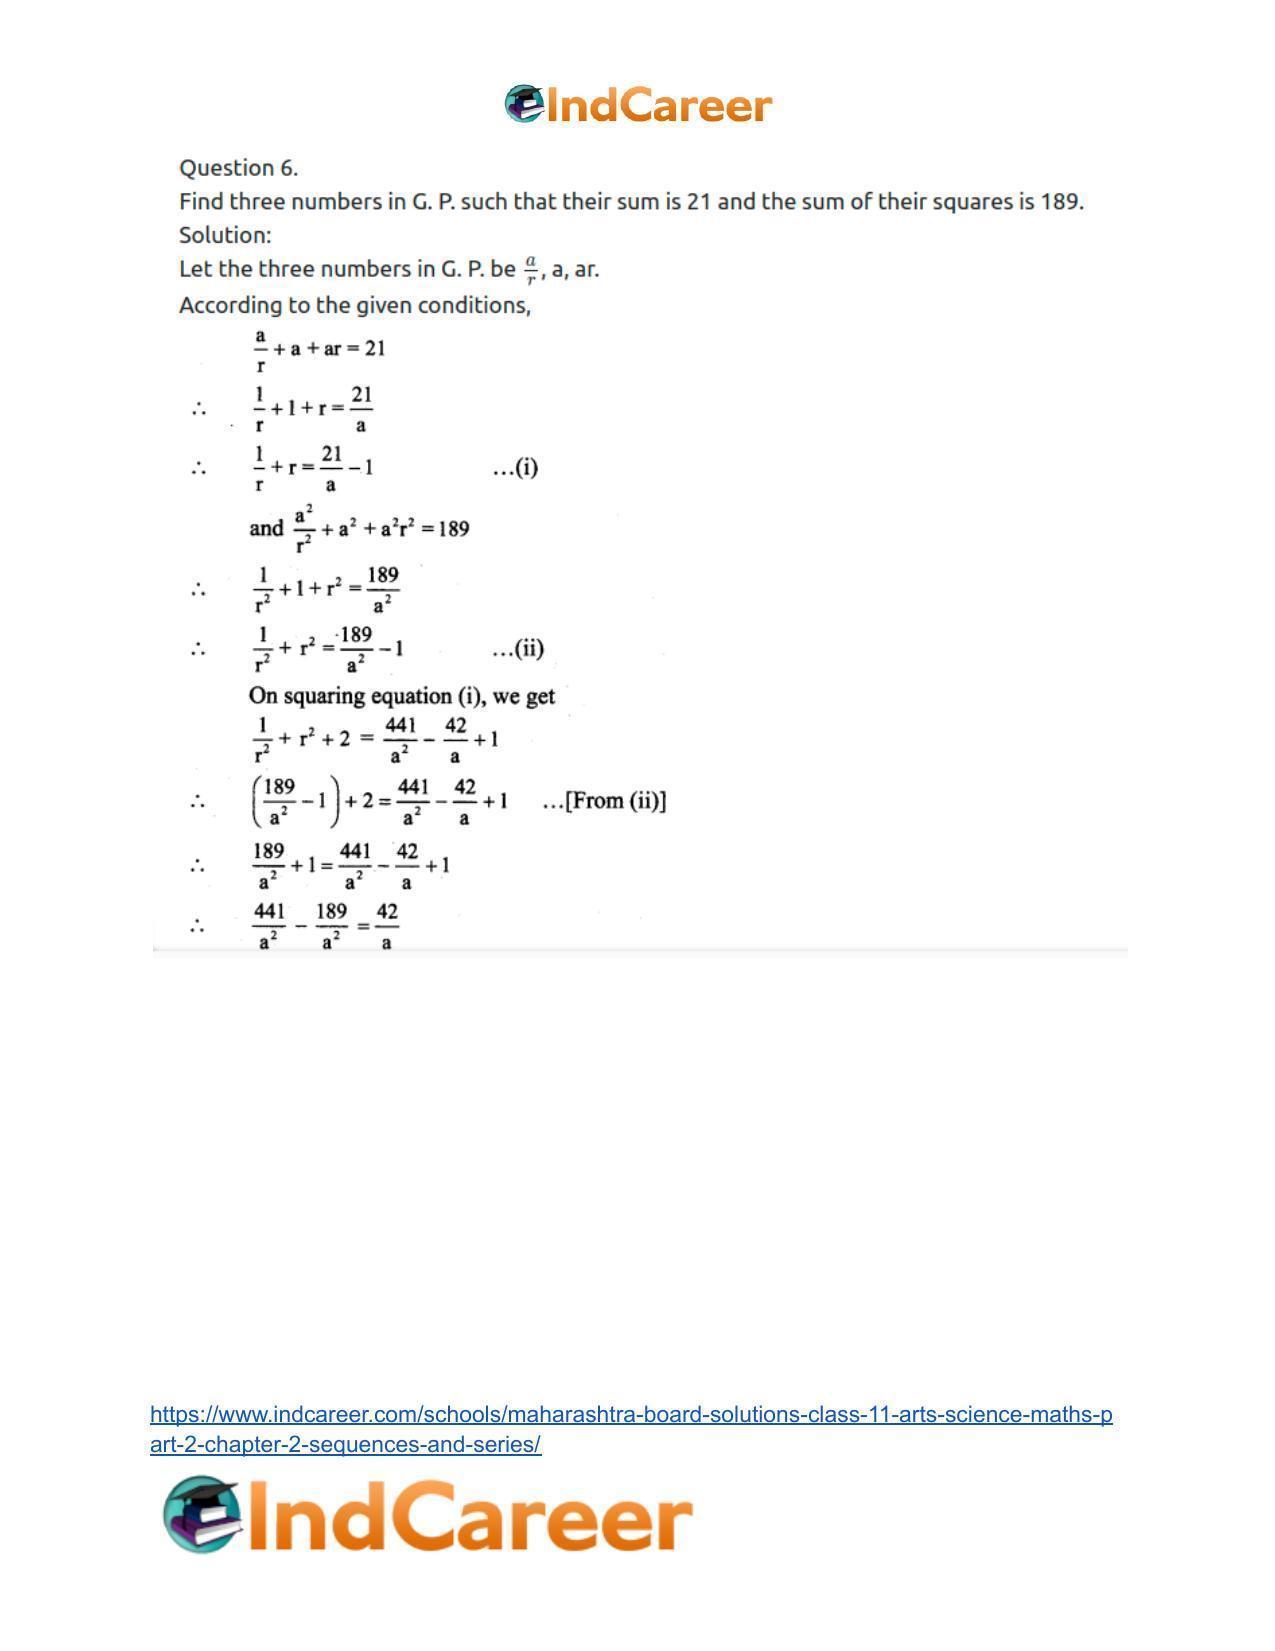 Maharashtra Board Solutions Class 11-Arts & Science Maths (Part 2): Chapter 2- Sequences and Series - Page 11